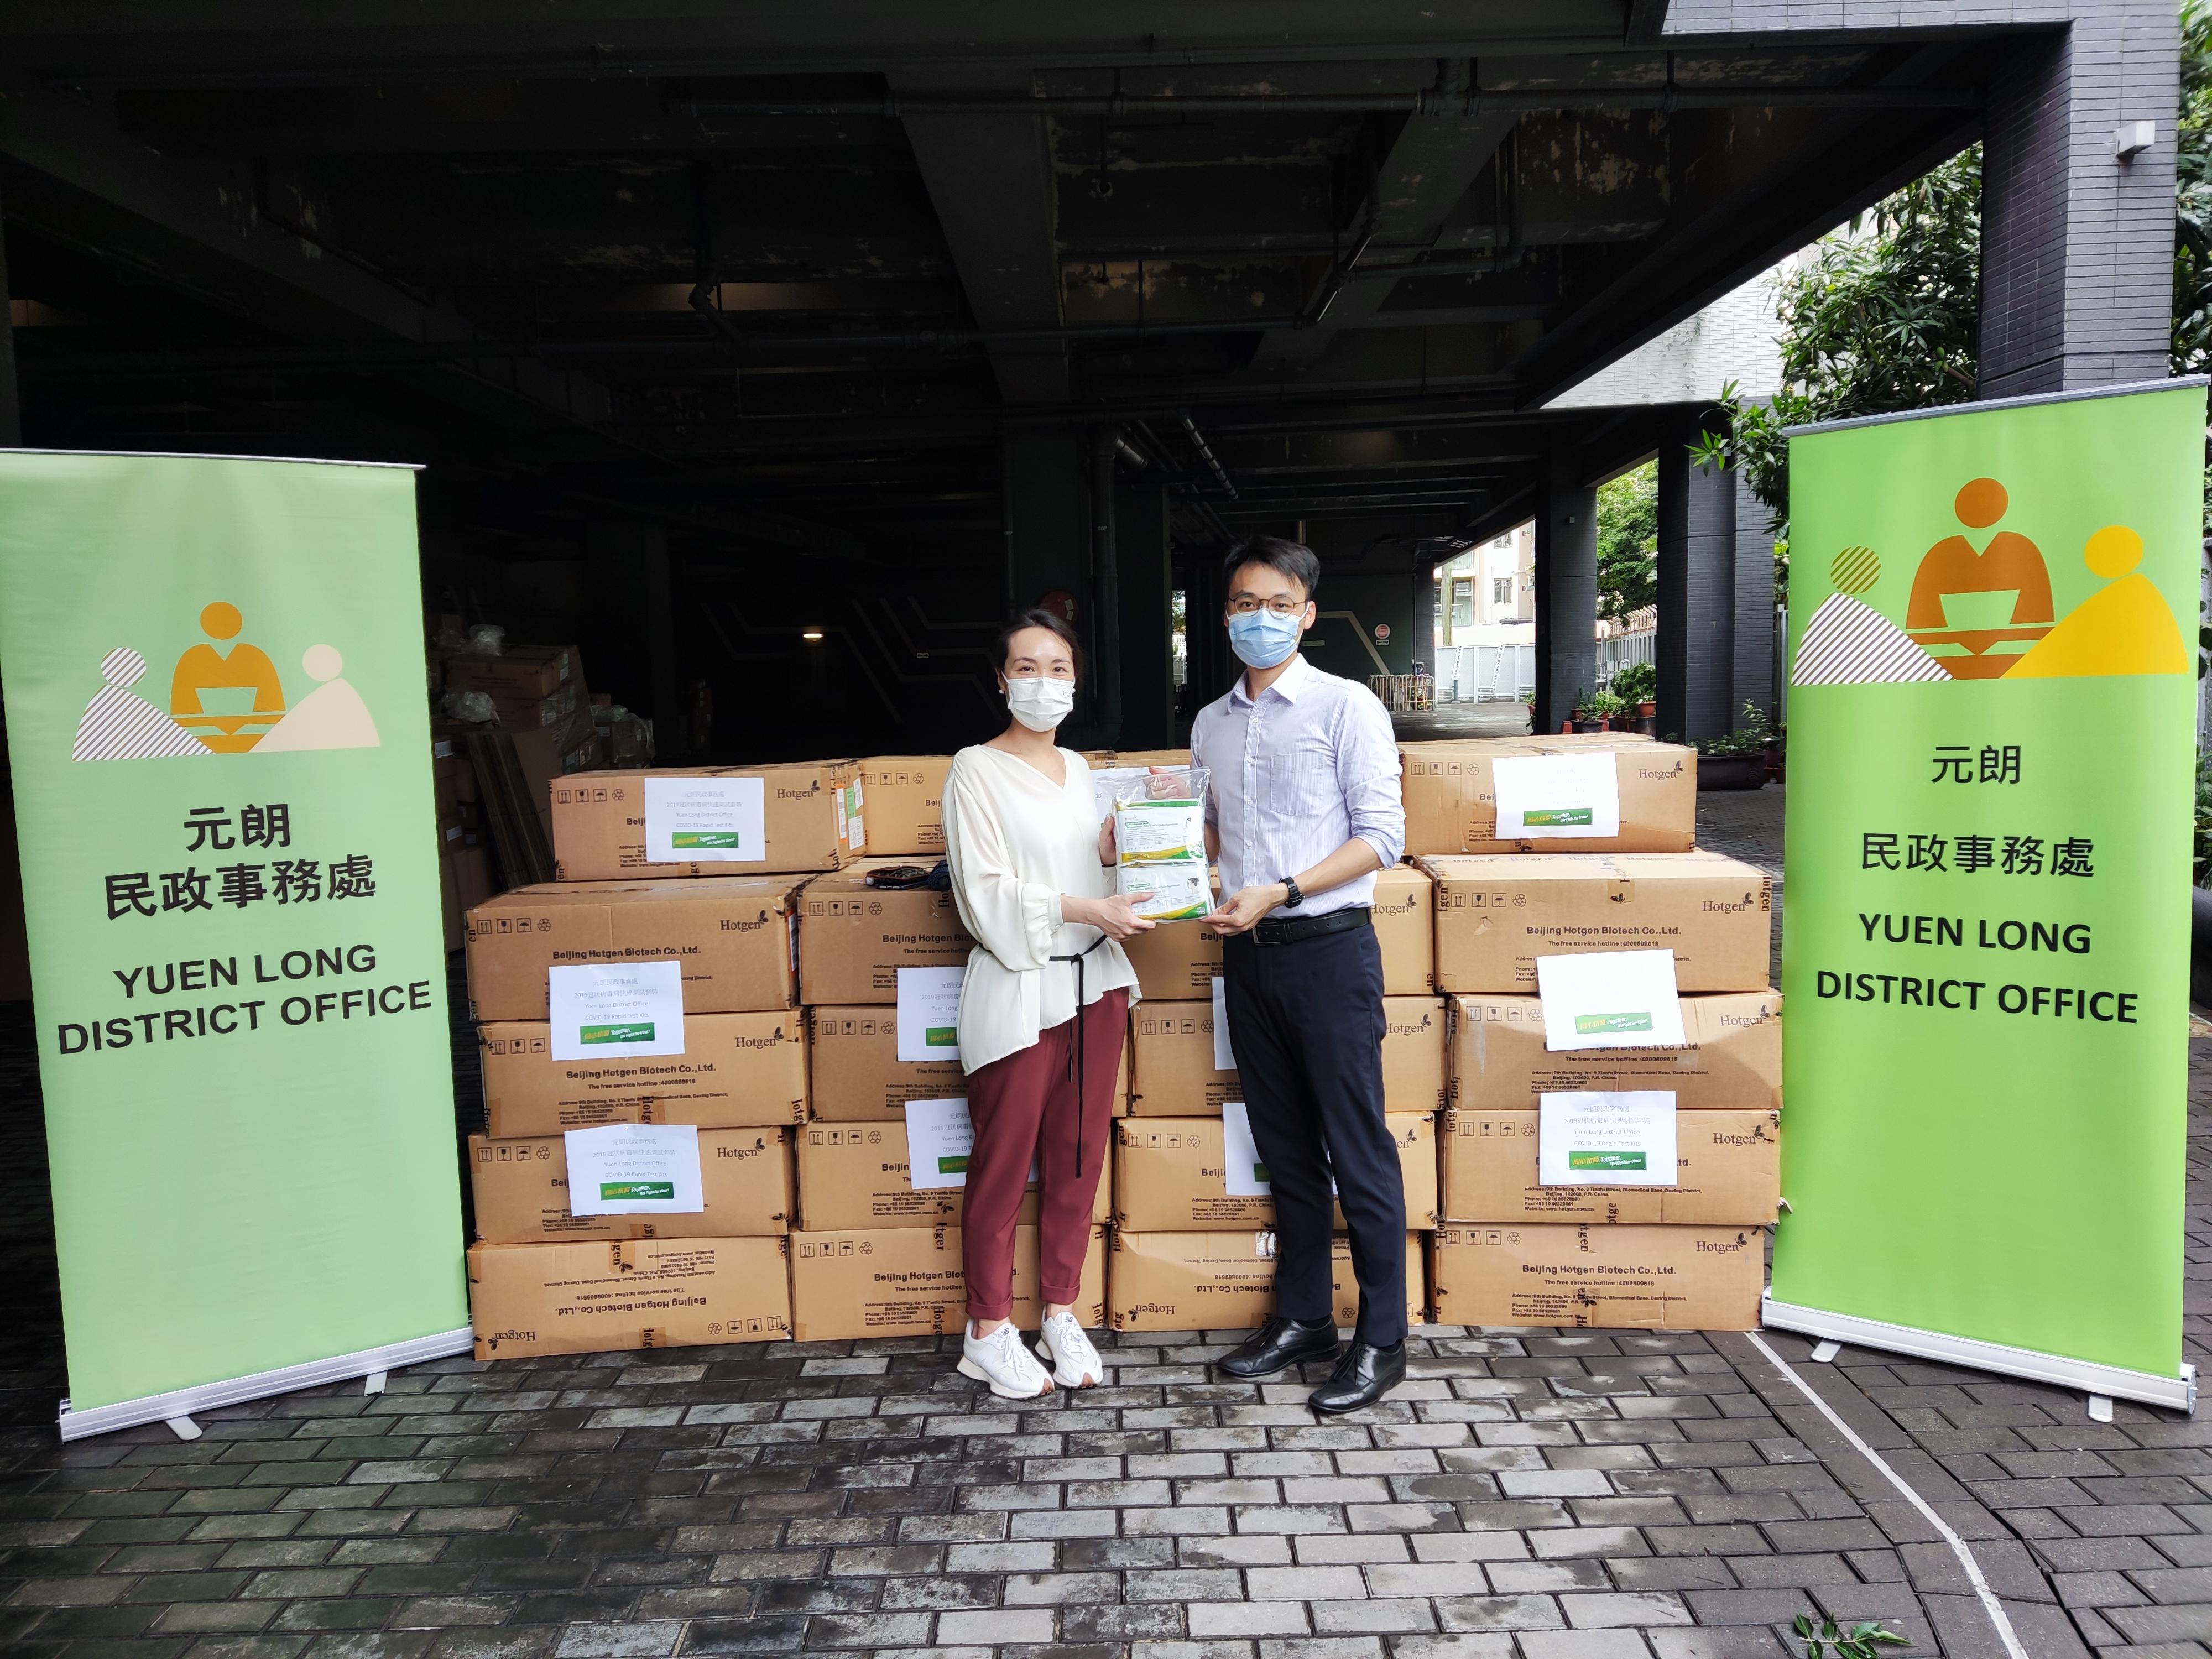 The Yuen Long District Office today (June 8) distributed COVID-19 rapid test kits to households, cleansing workers and property management staff living and working in Park Signature for voluntary testing through the property management company.